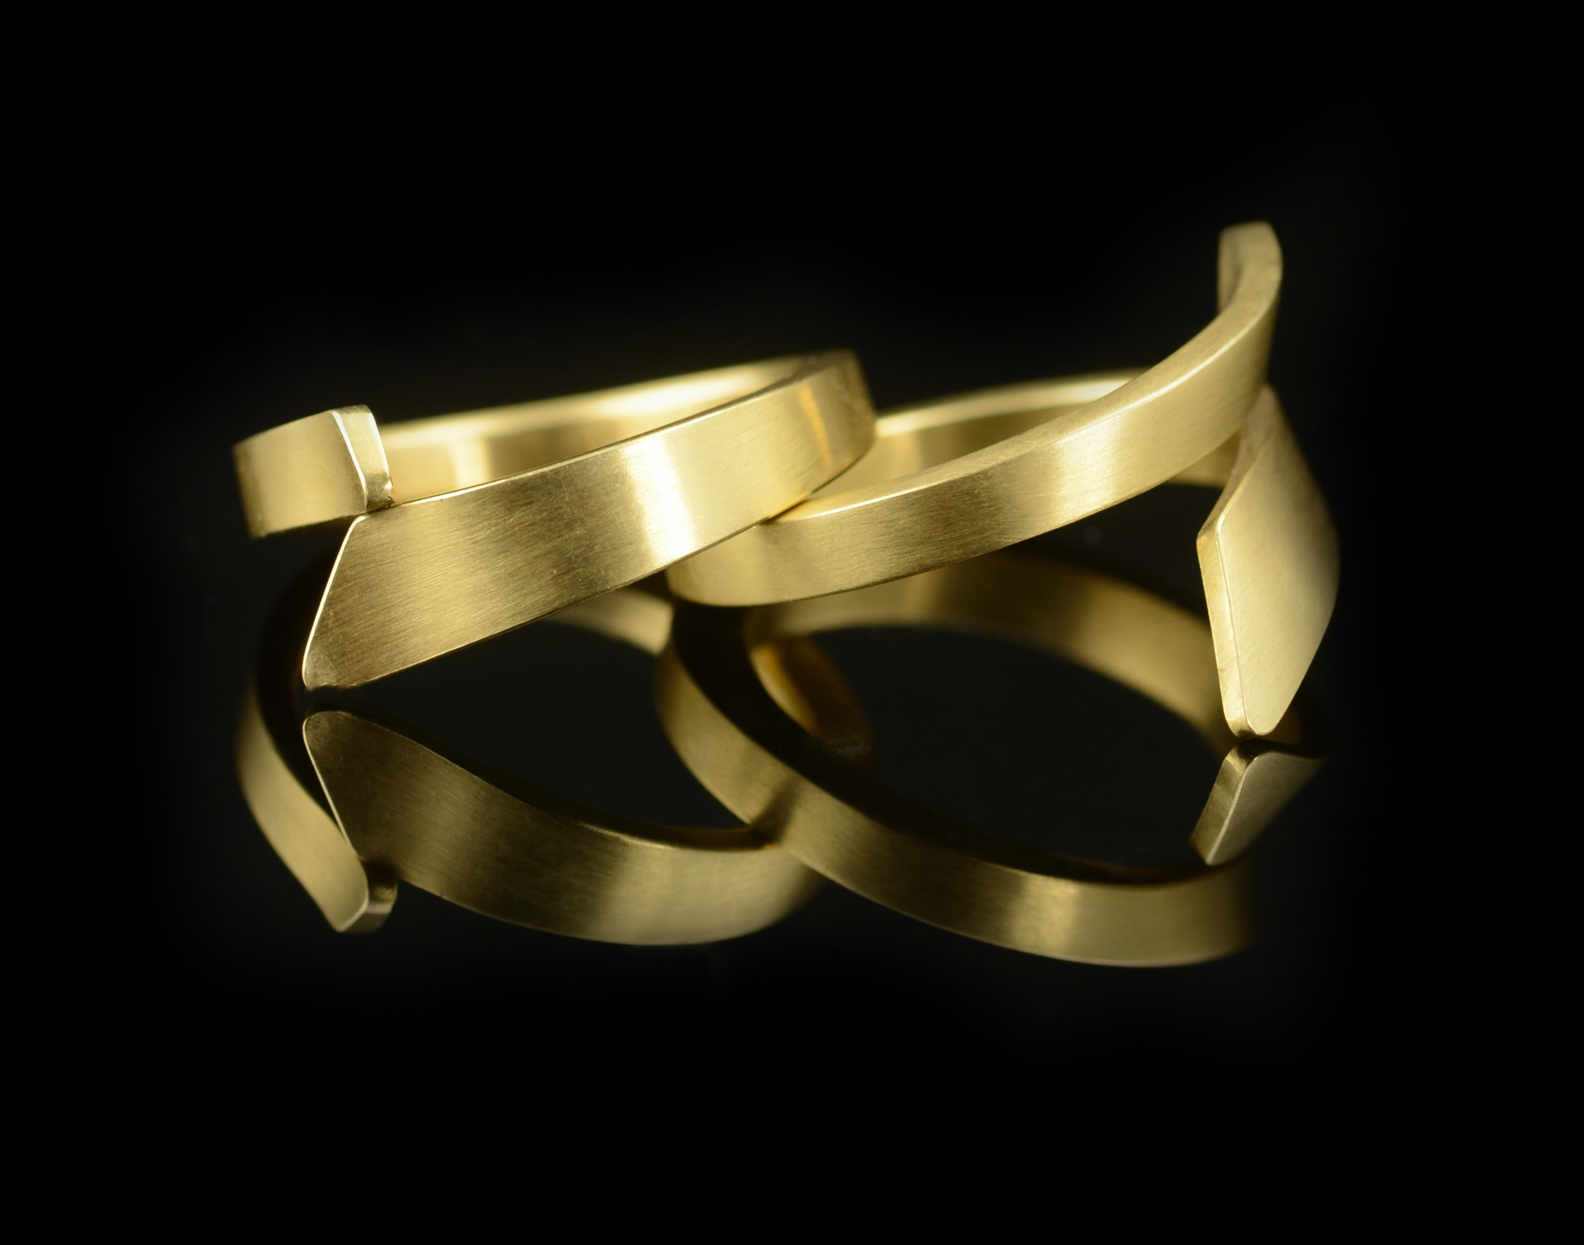 Forged yellow gold wedding rings